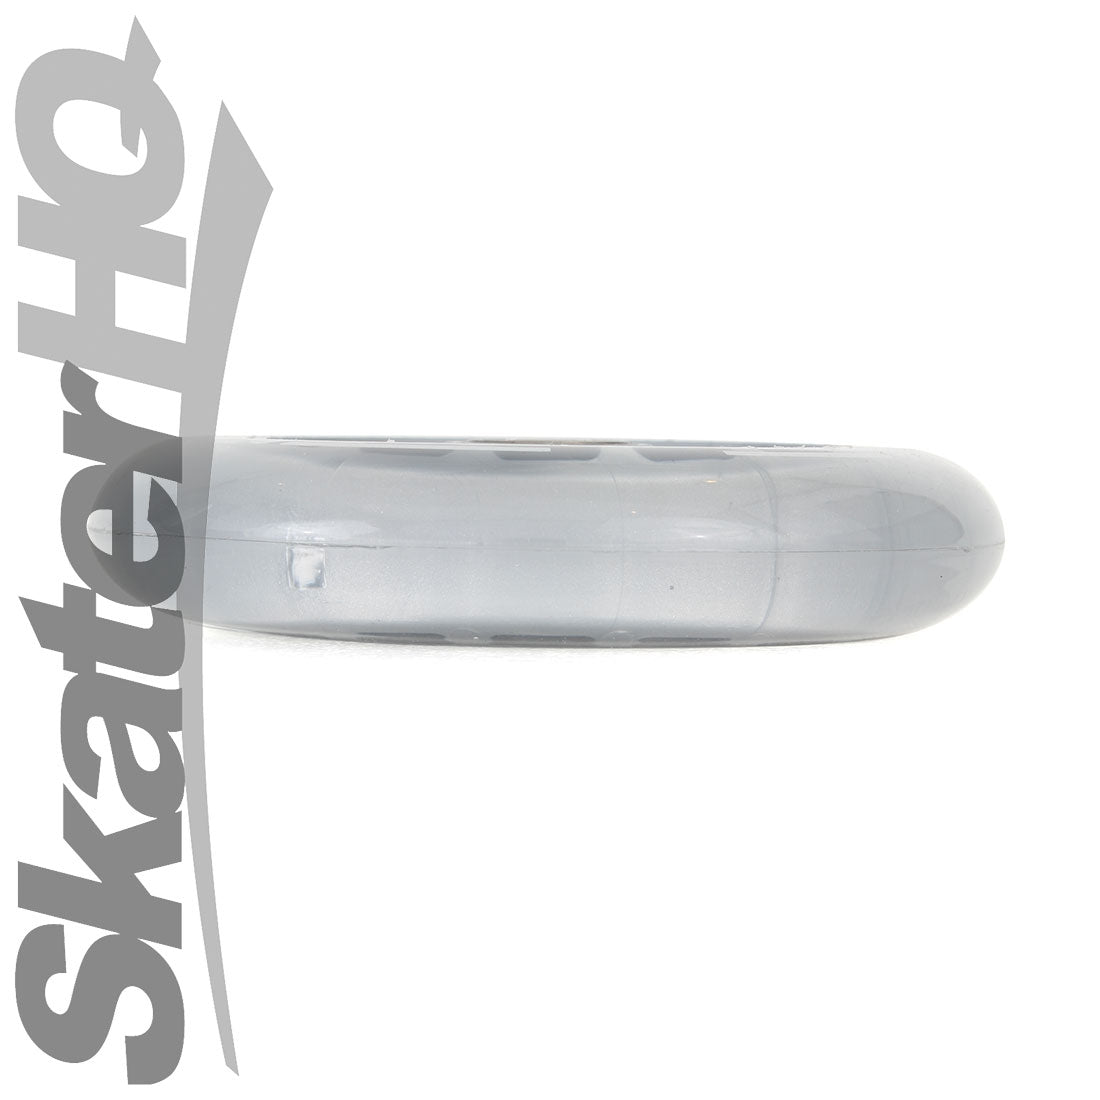 Micro 120mm Wheel - Clear Scooter Wheels